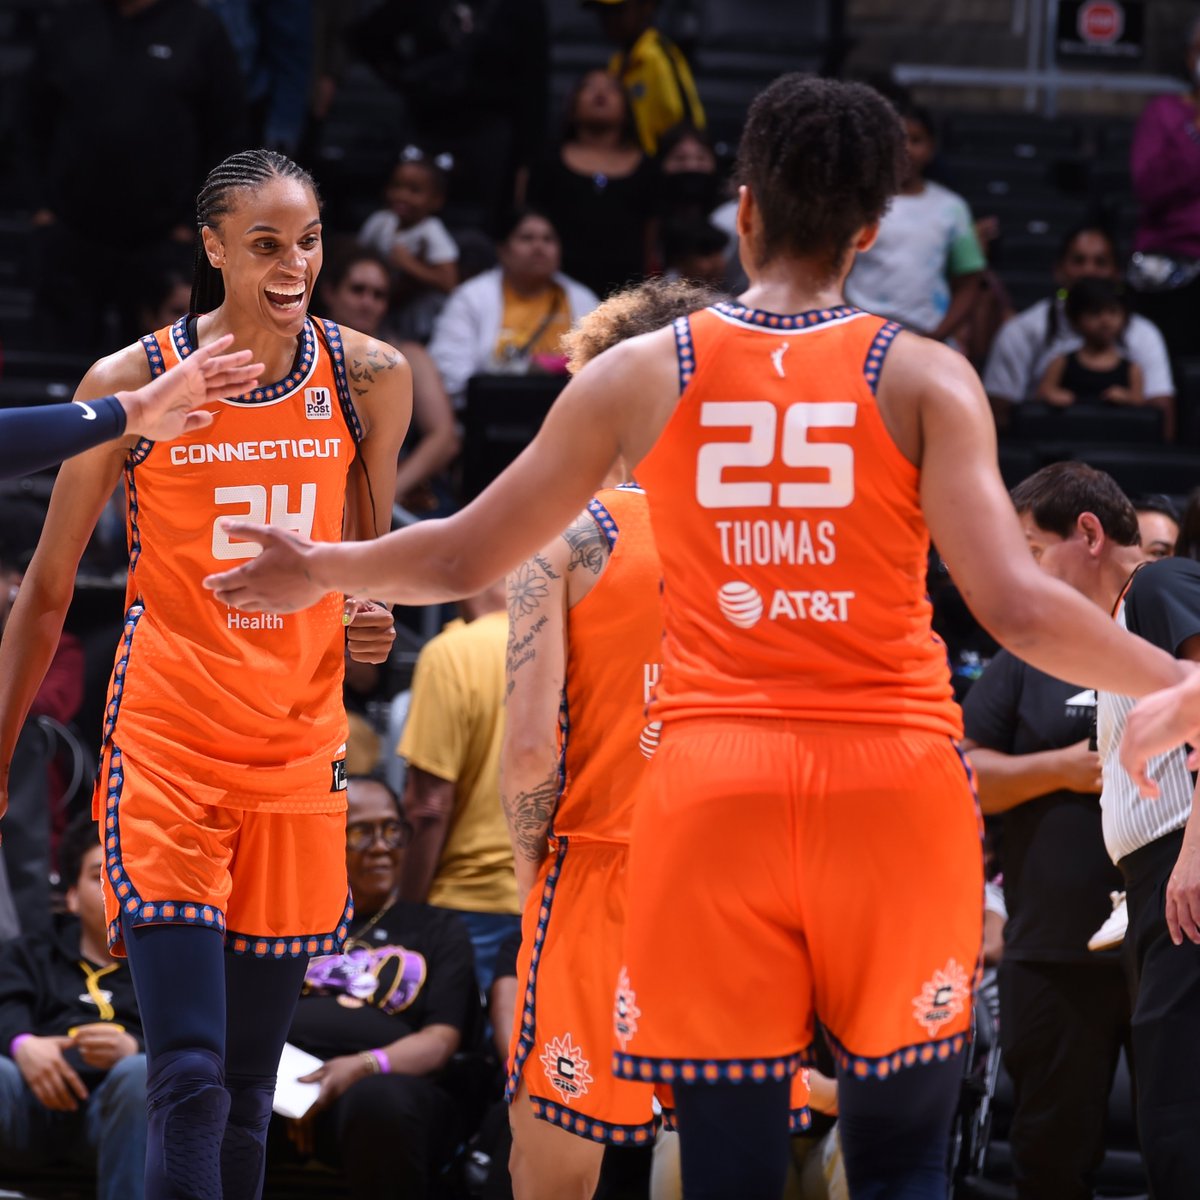 The @ConnecticutSun (12-3) look to protect home court against the @nyliberty (9-3) 

This Tuesday night #CommissionersCup matchup starts now on @NBATV 📺